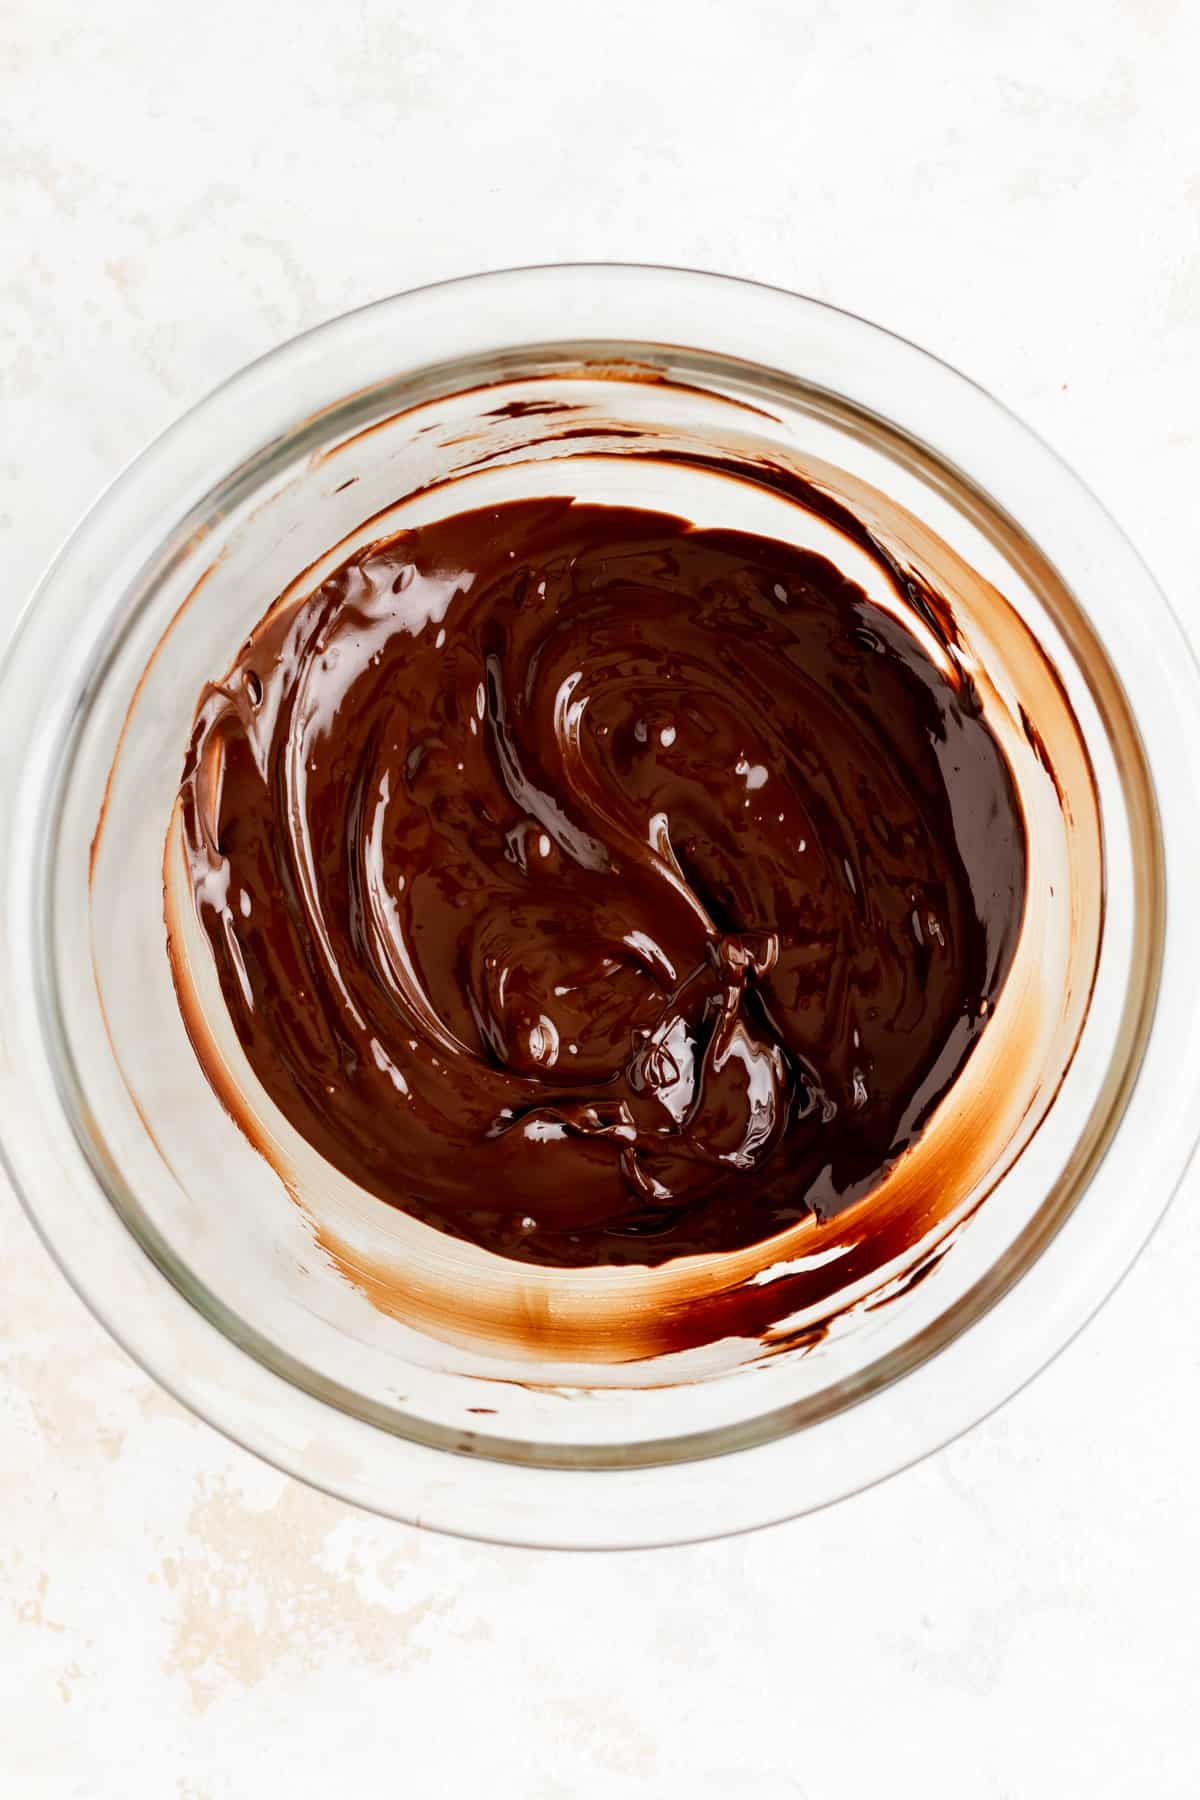 overhead view of melted chocolate in a glass bowl after 70 seconds of microwaving.